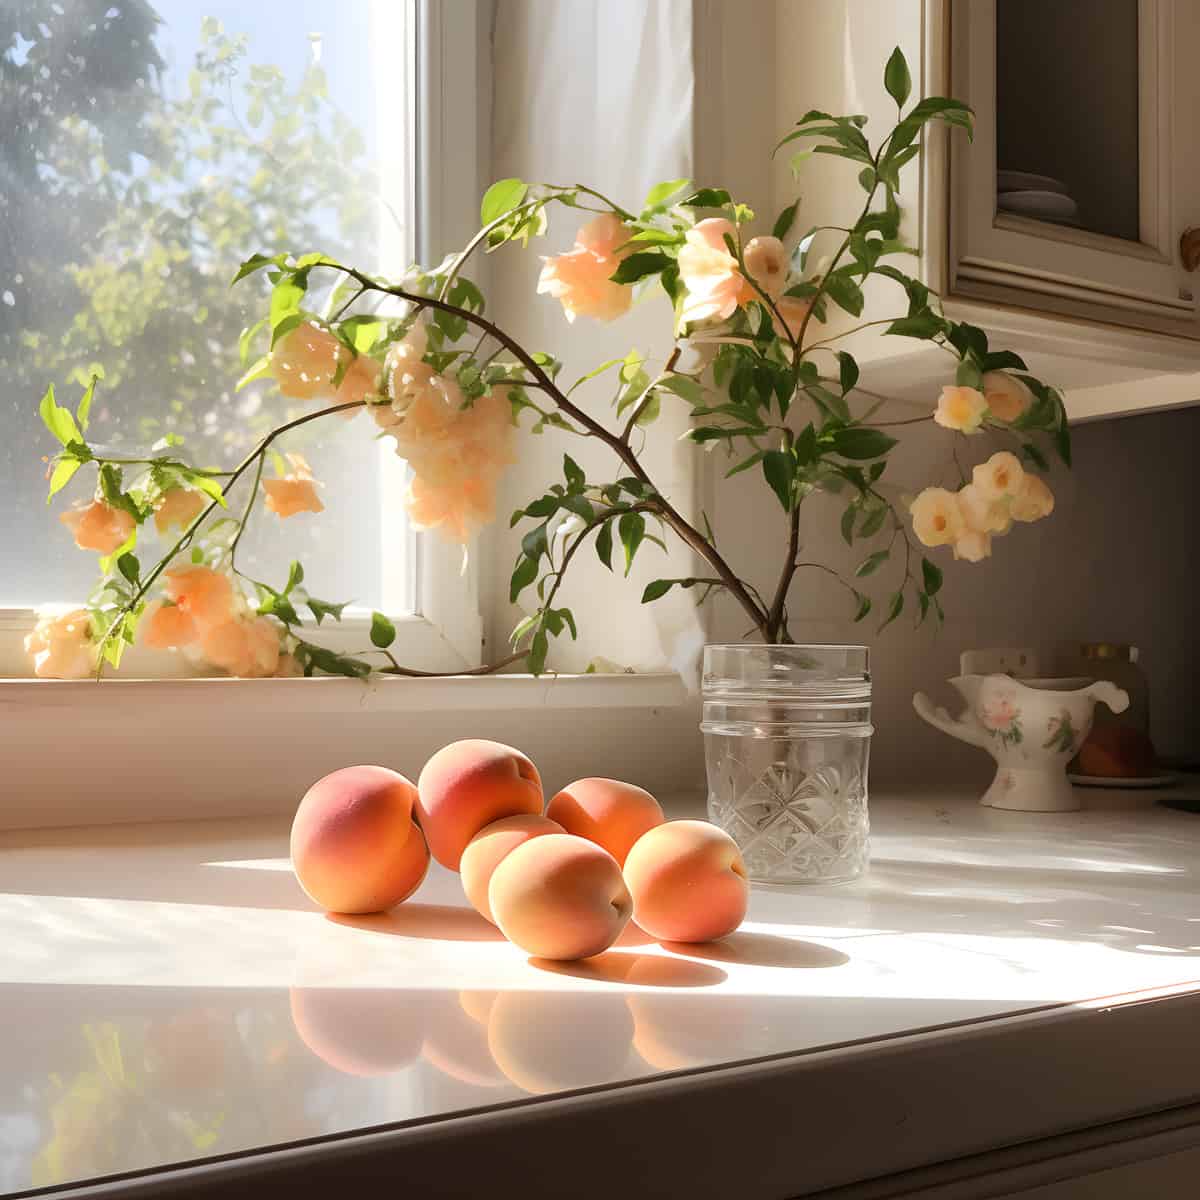 Siberian Apricot on a kitchen counter